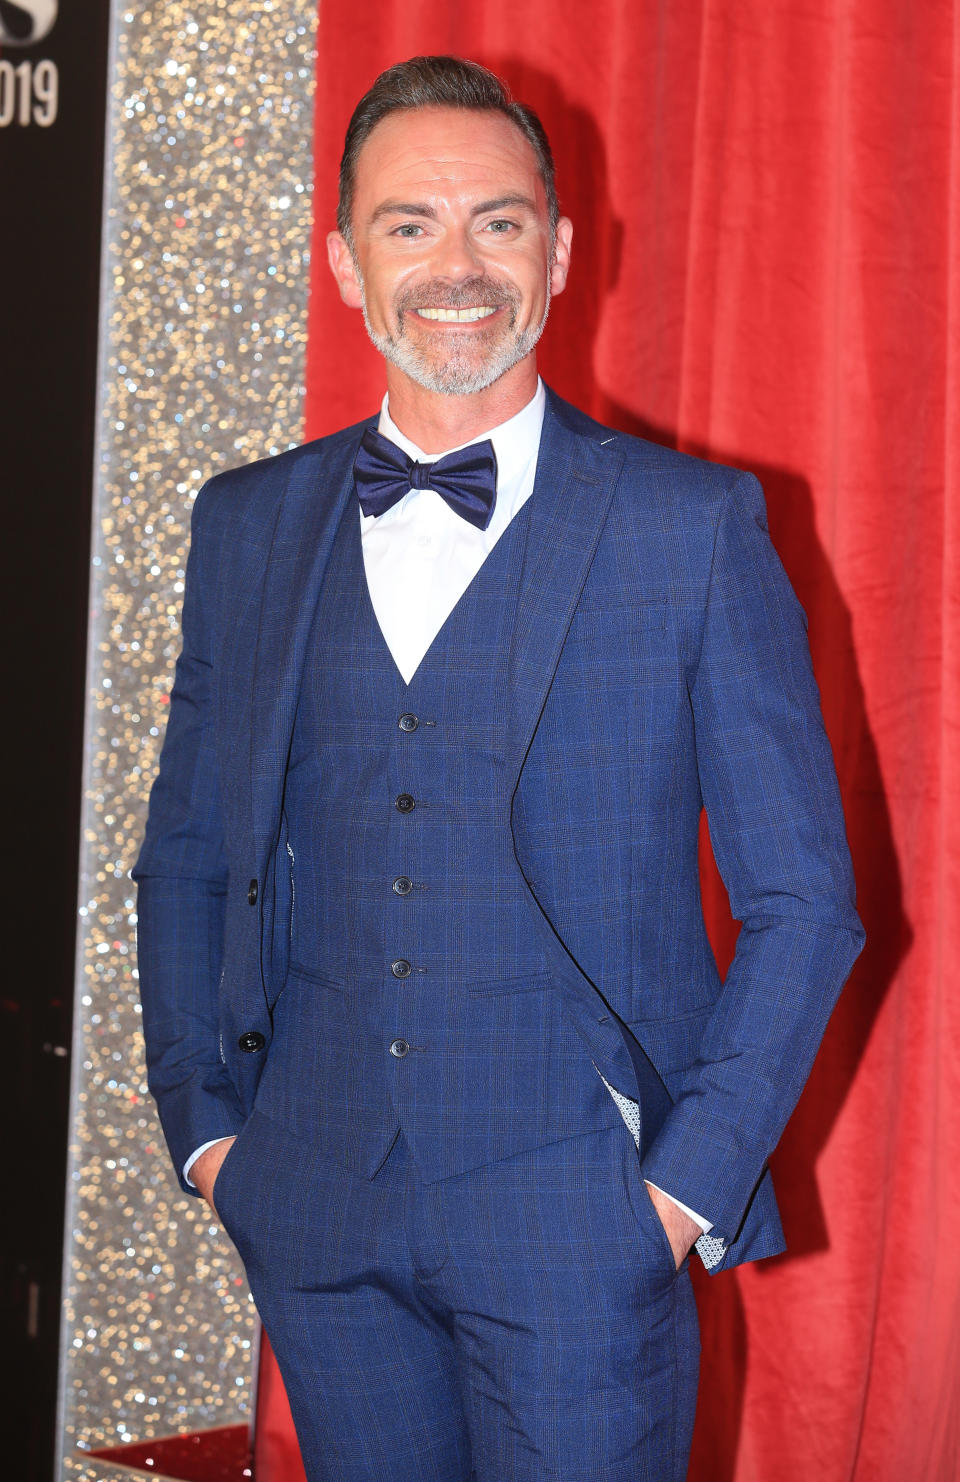 Daniel Brocklebank who plays Billy Mayhew in Coronation Street attending the British Soap Awards 2019 held at the Lyric Theatre at The Lowry in Manchester.